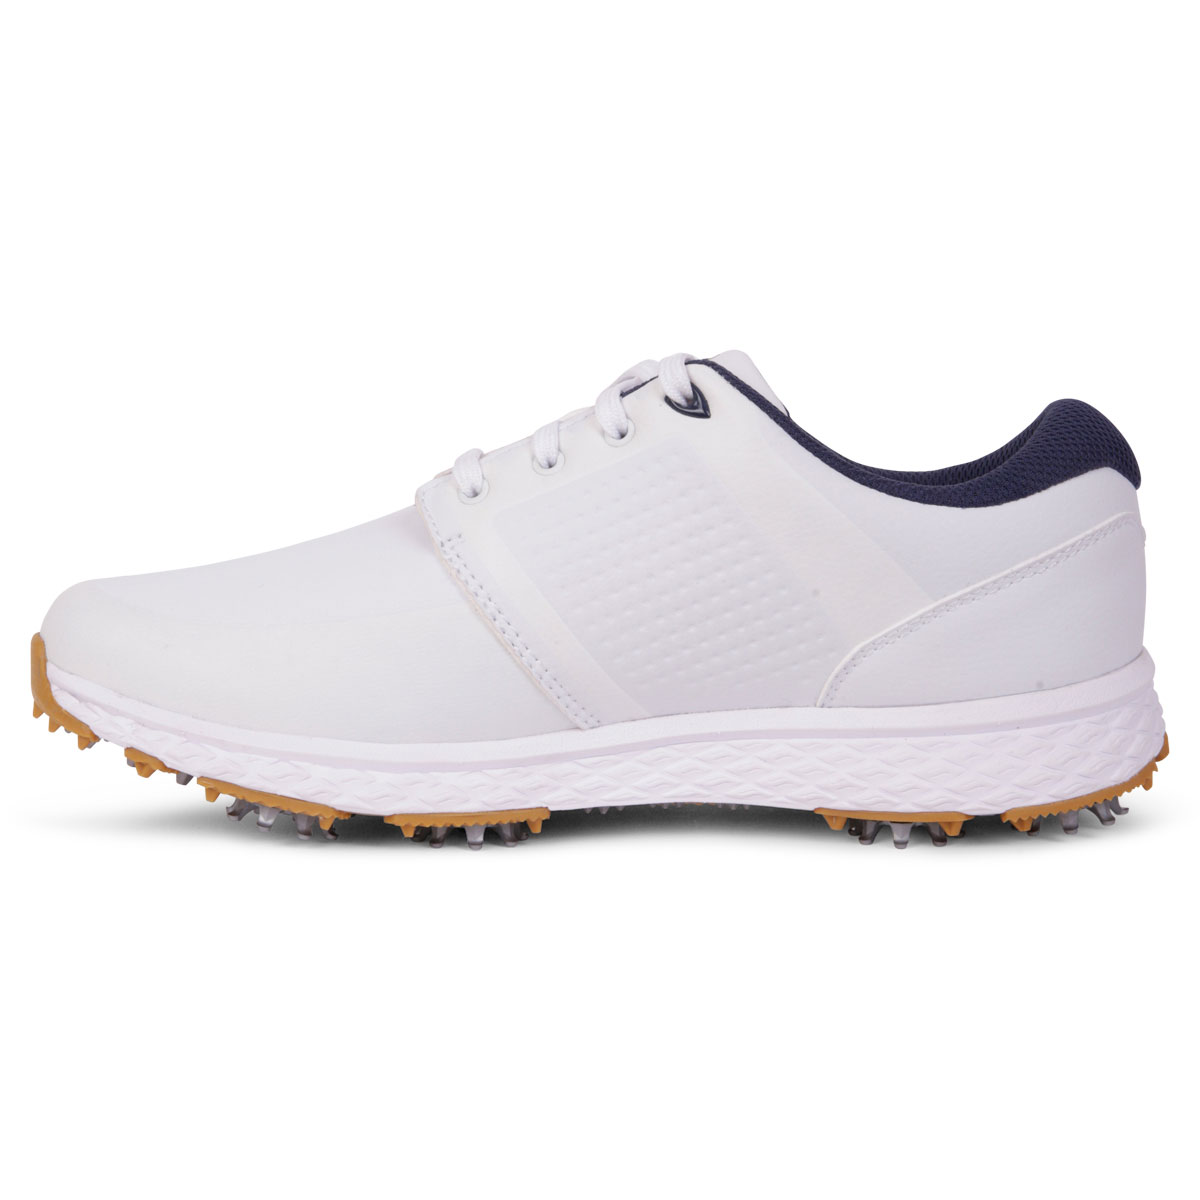 Benross Vipor Spiked Shoes from american golf